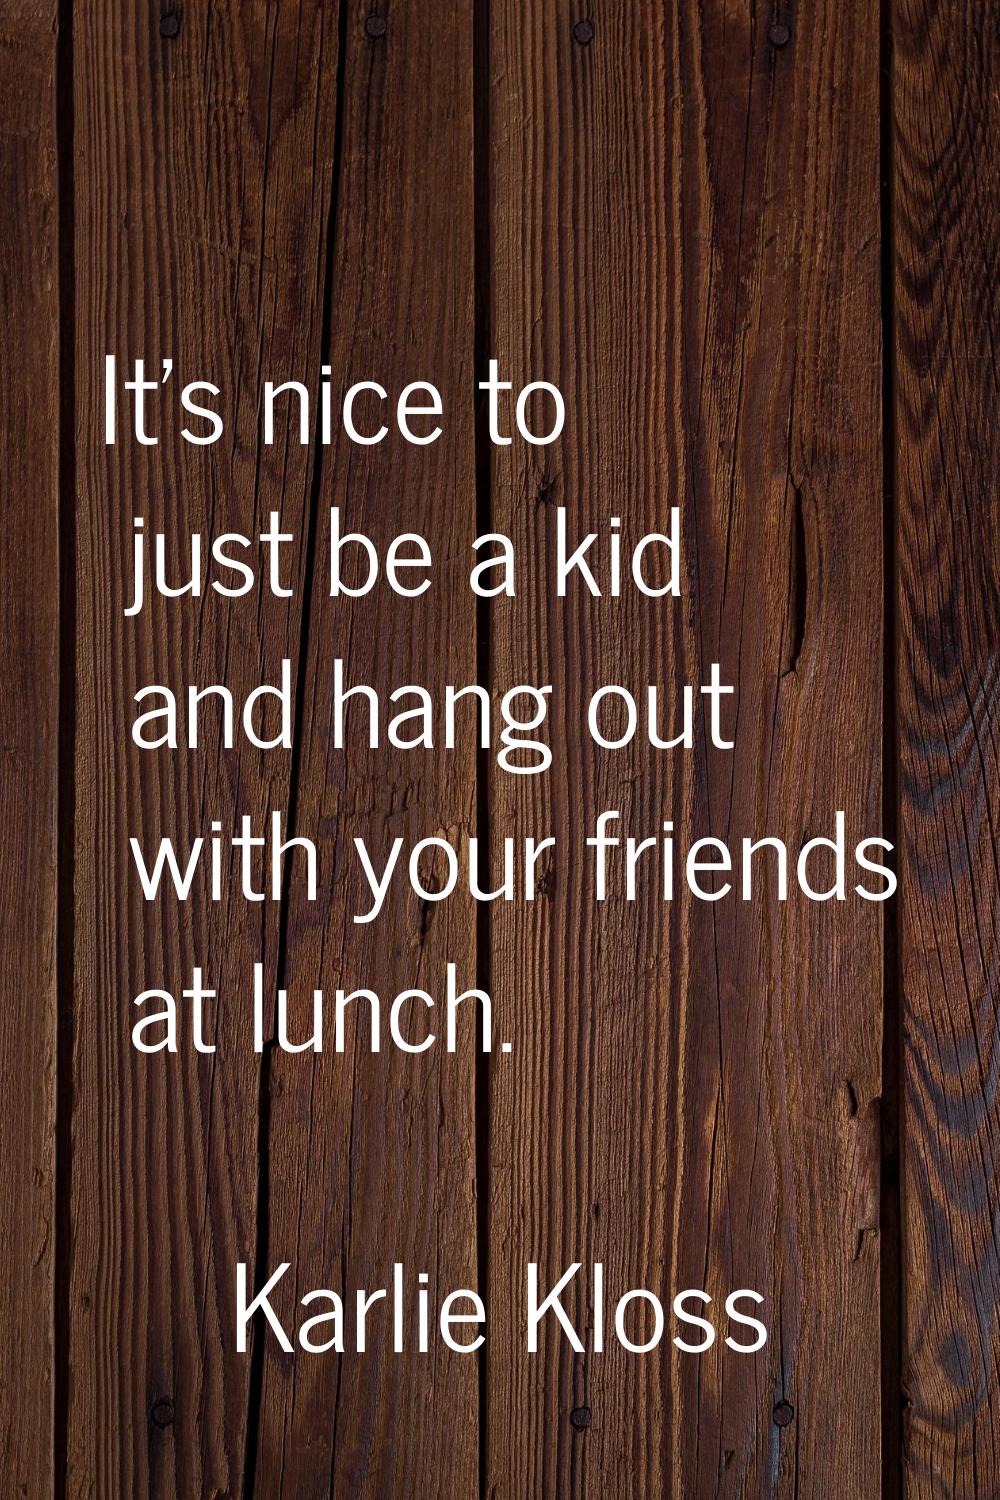 It's nice to just be a kid and hang out with your friends at lunch.